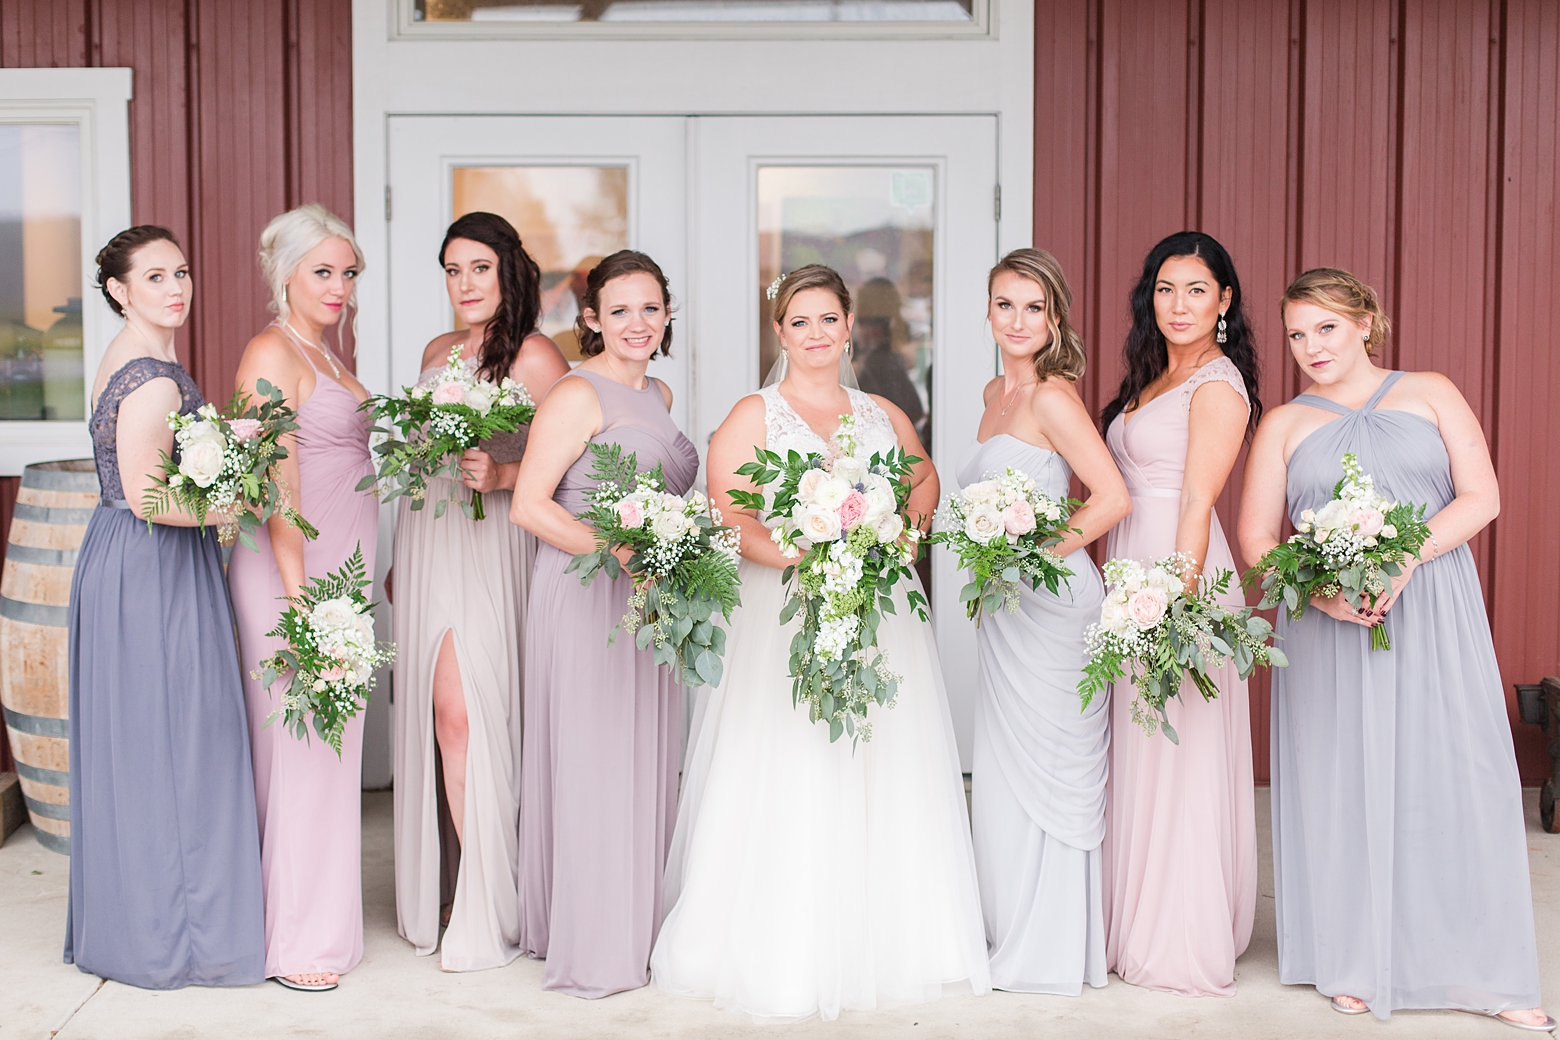 Outer Banks Sanctuary Vineyards Wedding by Angie McPherson Photography